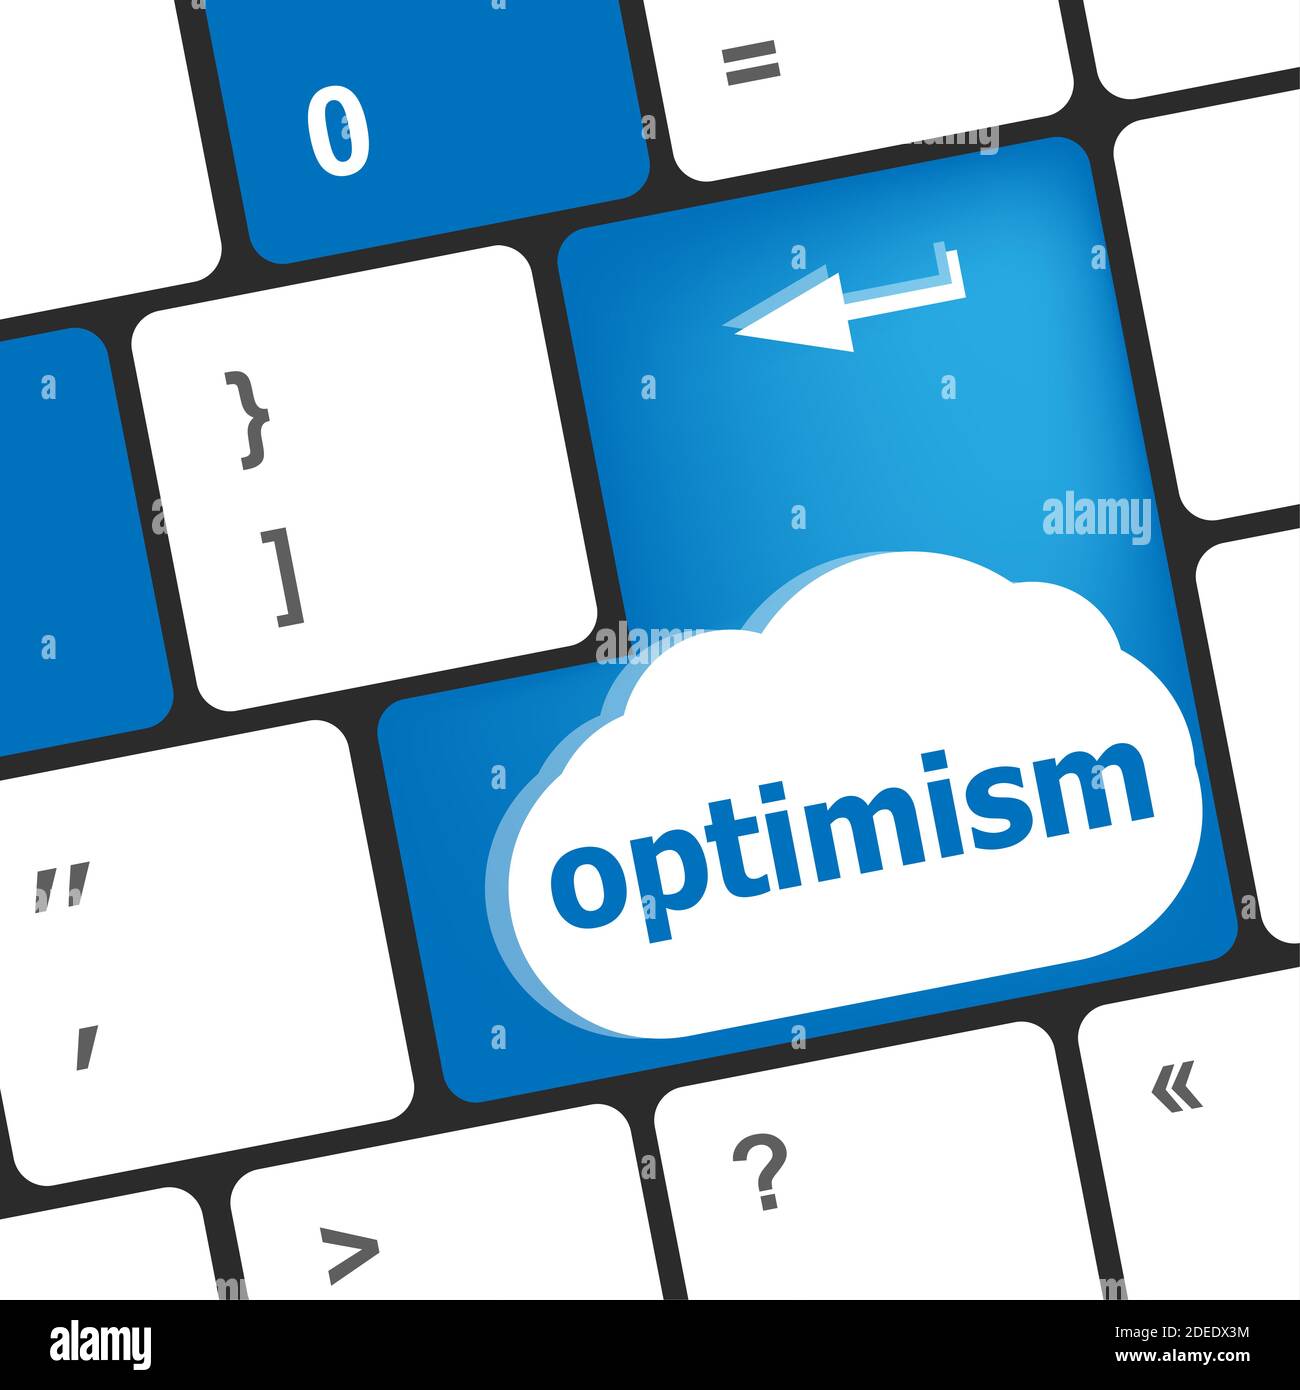 optimism button on the keyboard close-up Stock Photo